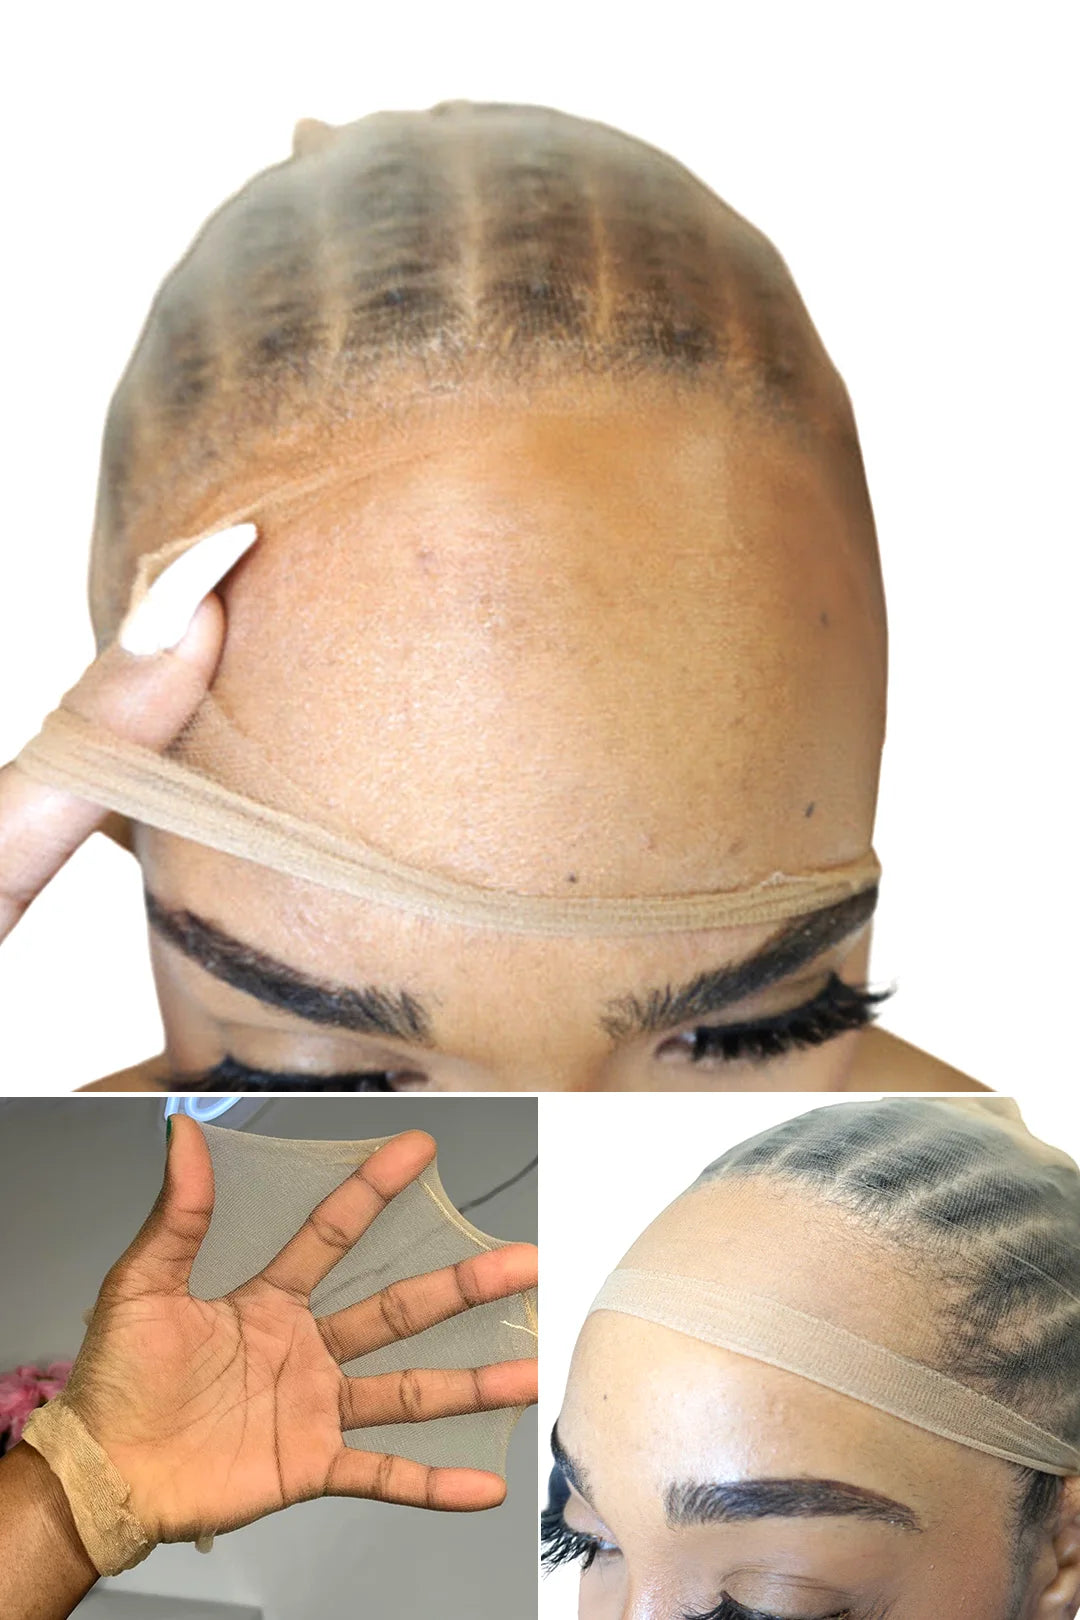 HD Wig Cap front package image